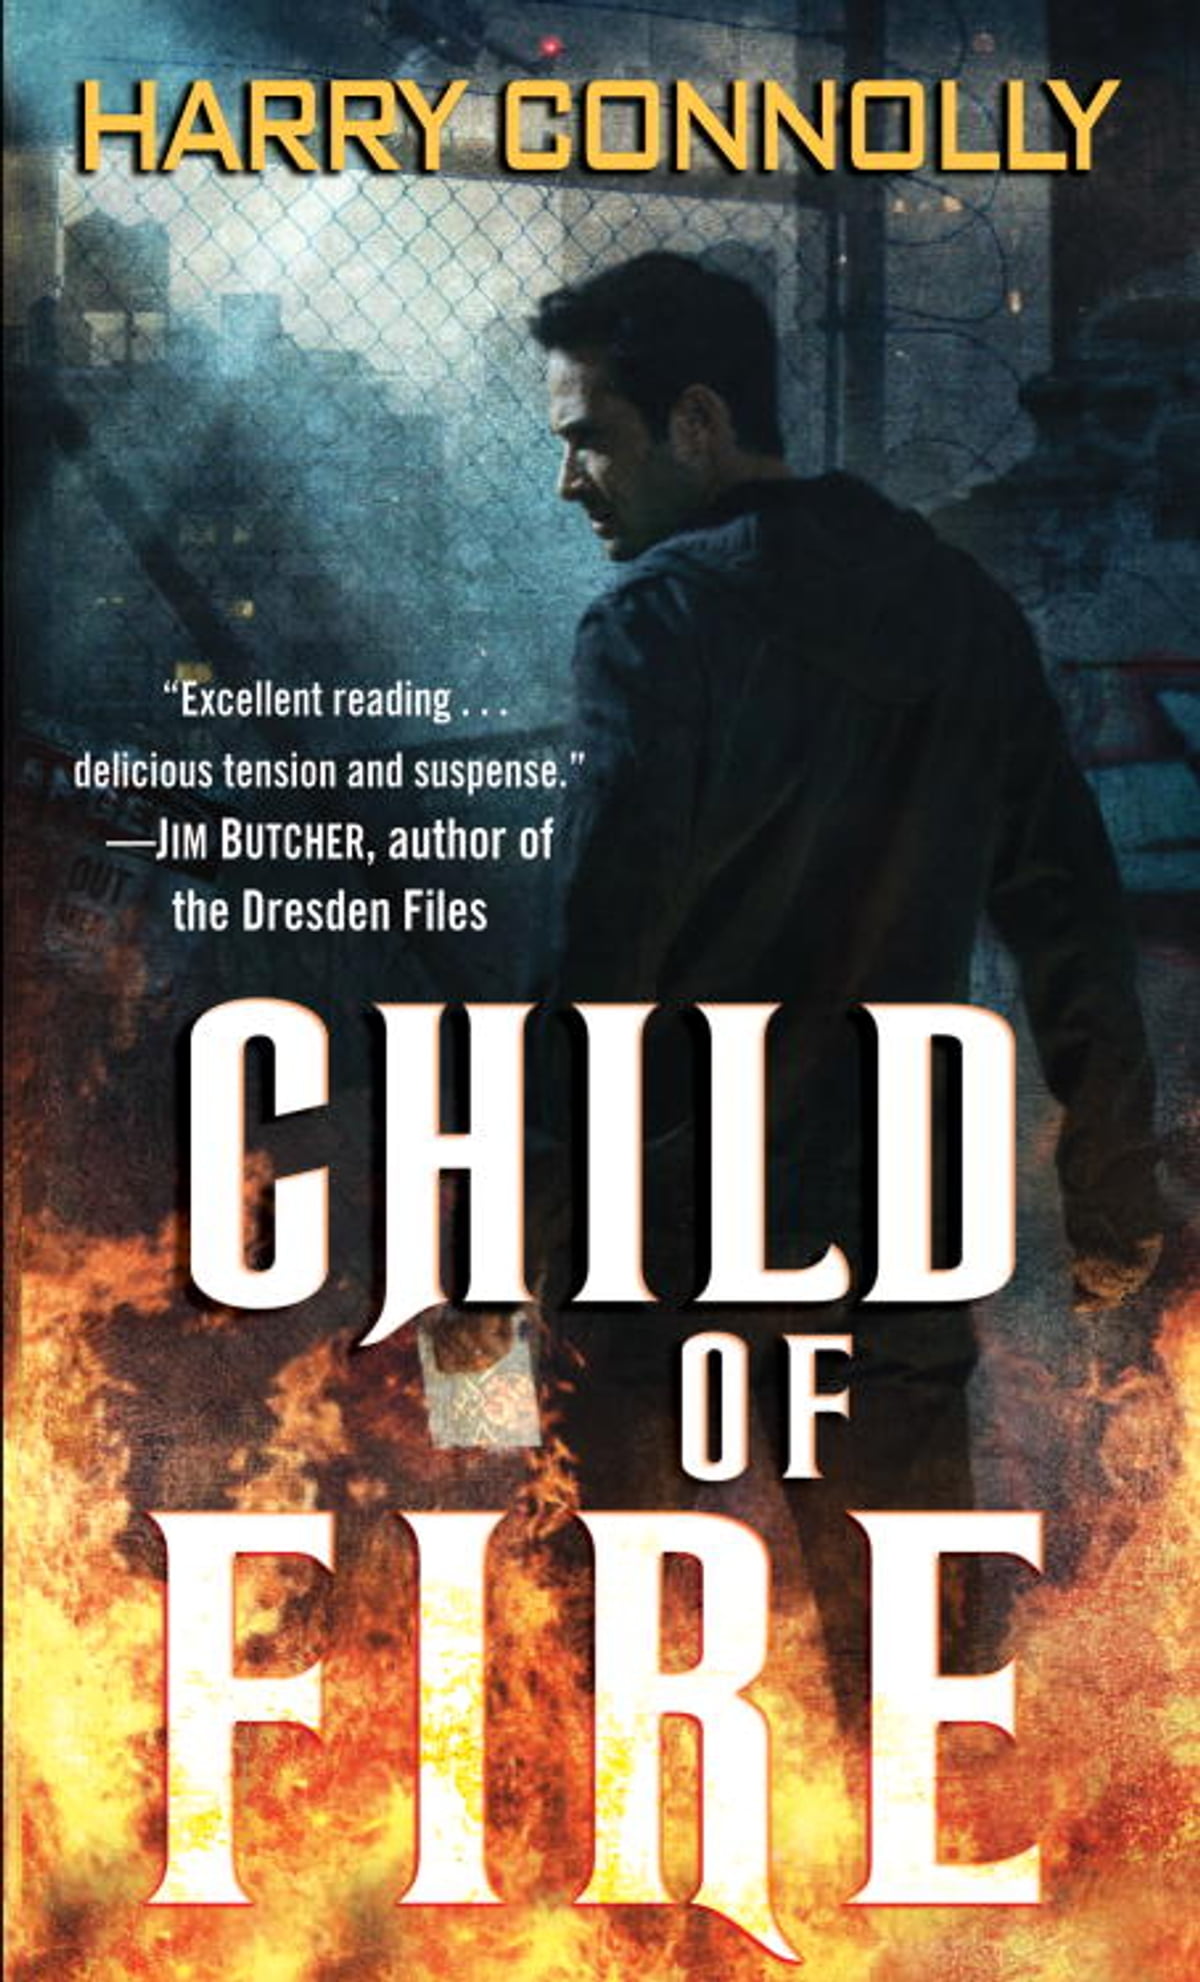 Harry Connolly: Child of Fire (2009, Del Rey)